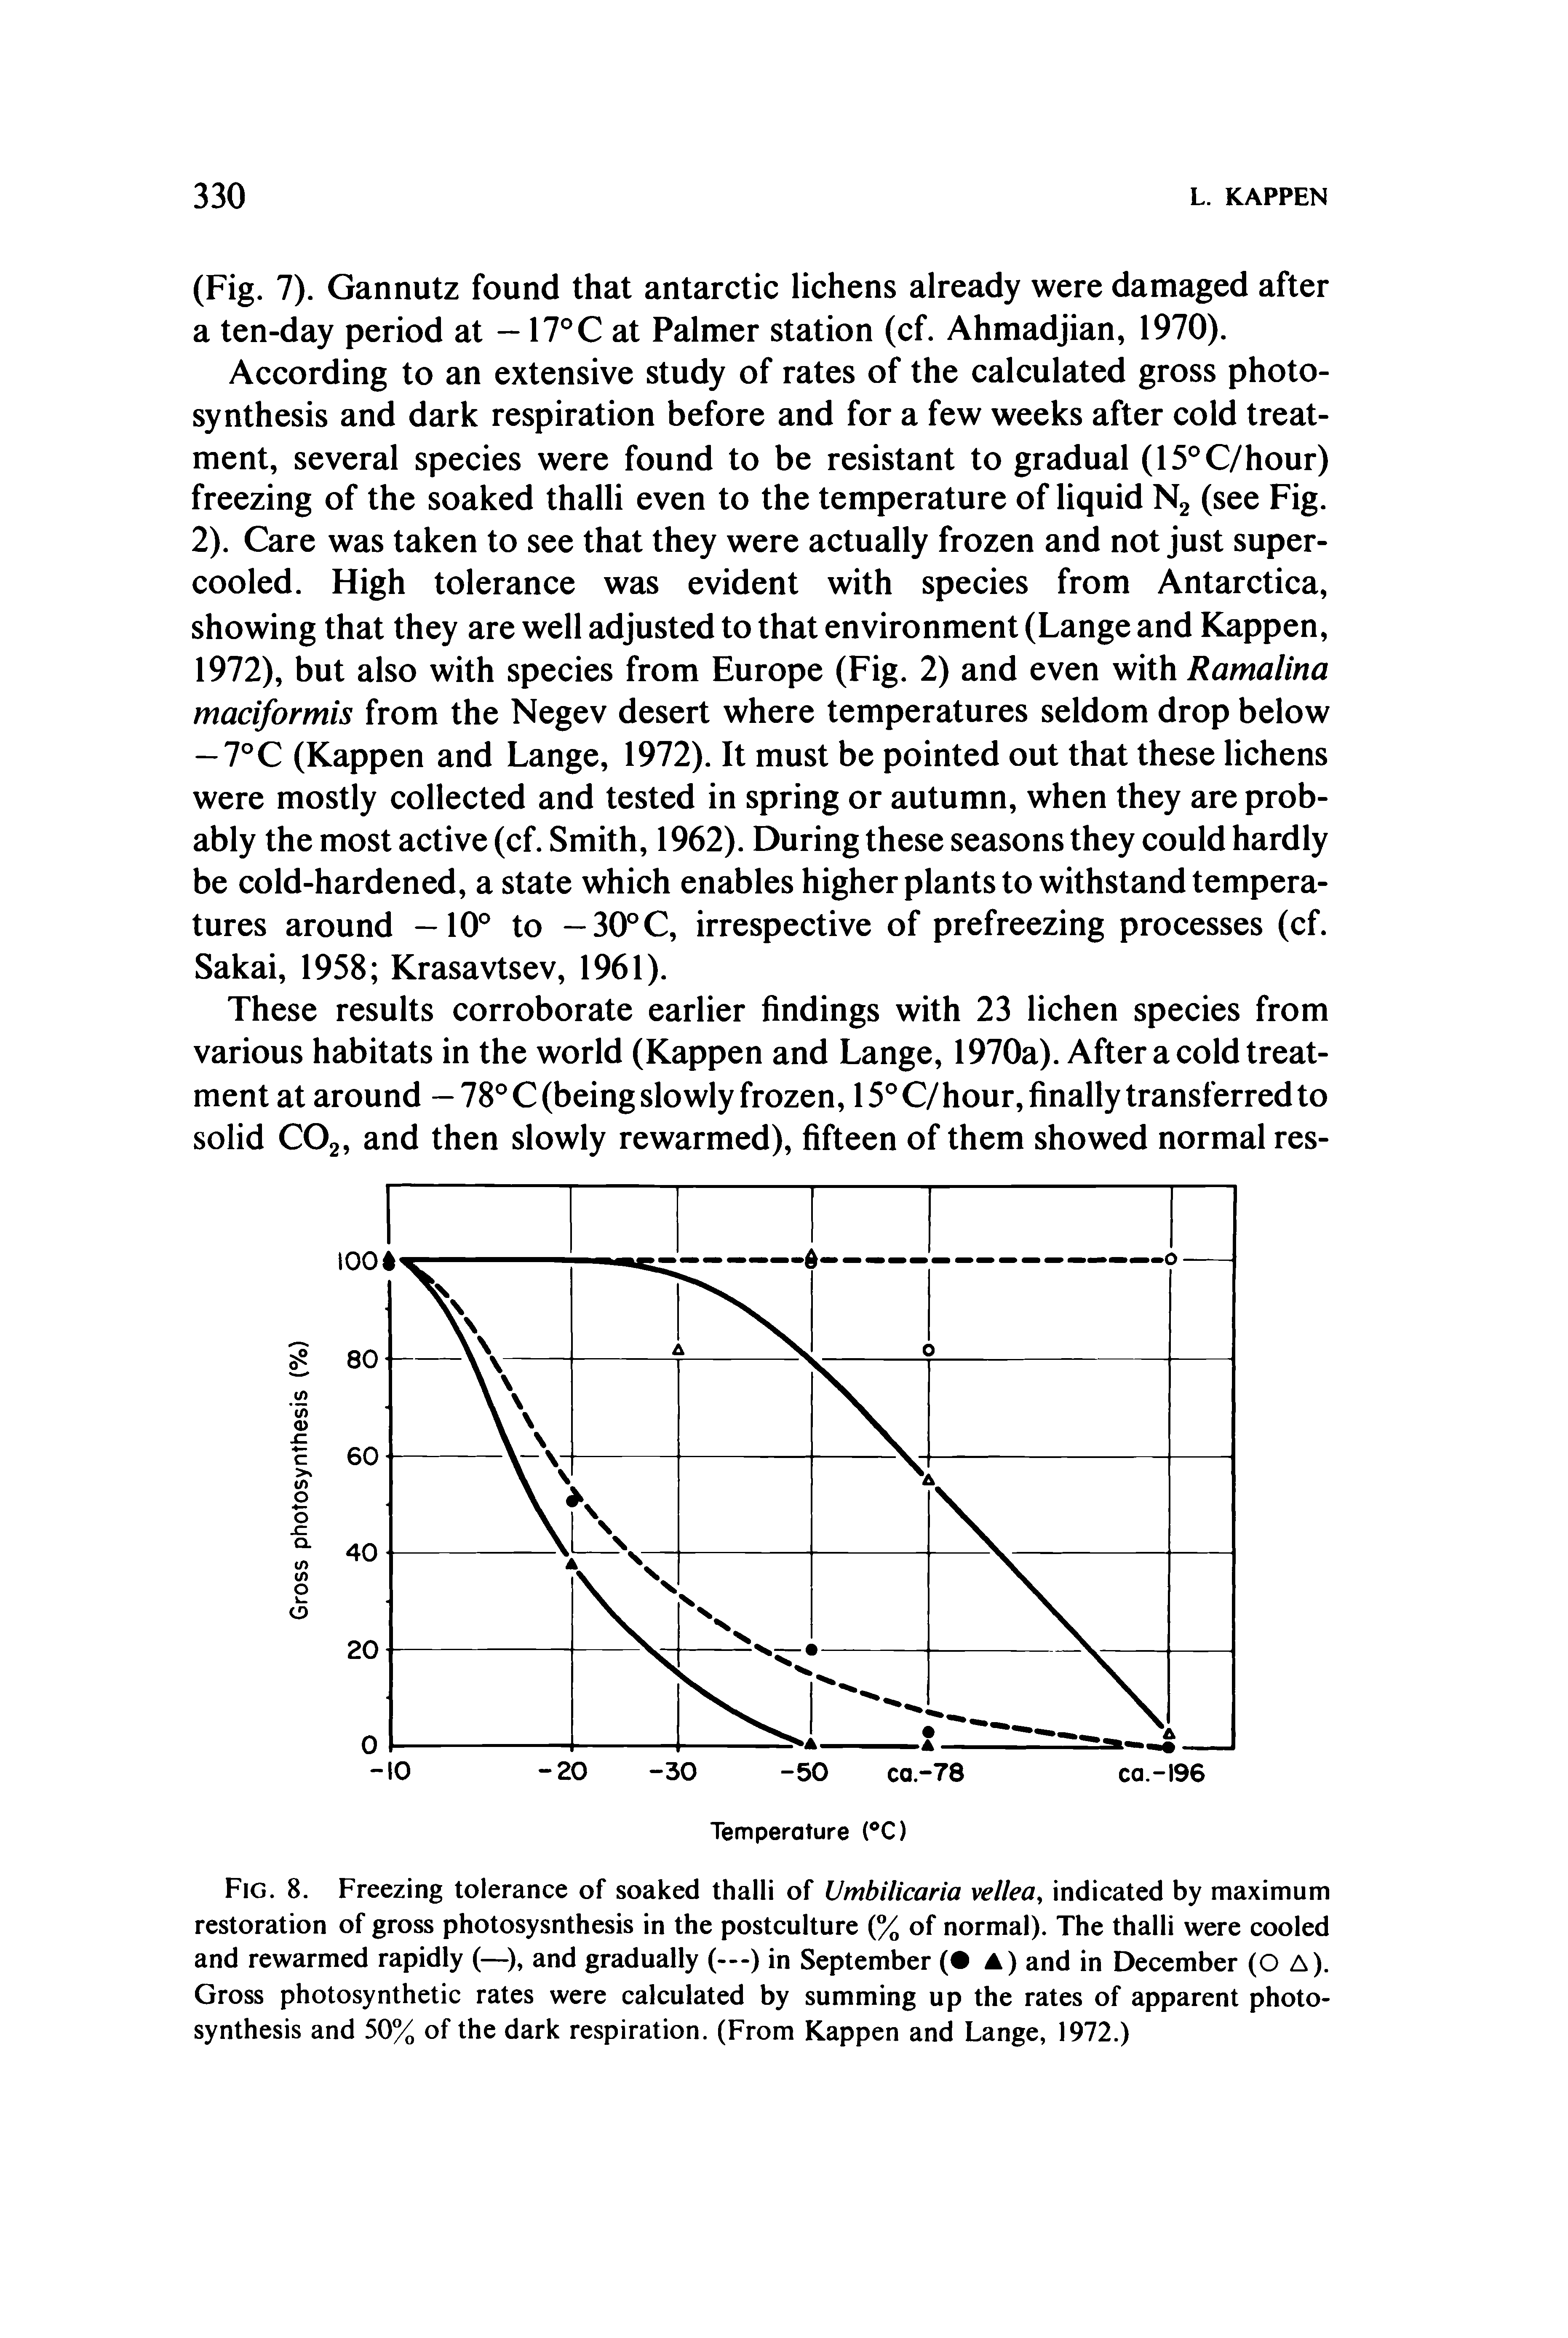 Fig. 8. Freezing tolerance of soaked thalli of Vmbilicaria vellea indicated by maximum restoration of gross photosysnthesis in the postculture (% of normal). The thalli were cooled and rewarmed rapidly (—and gradually (—) in September ( A) and in December (O A). Gross photosynthetic rates were calculated by summing up the rates of apparent photosynthesis and 50% of the dark respiration. (From Kappen and Lange, 1972.)...